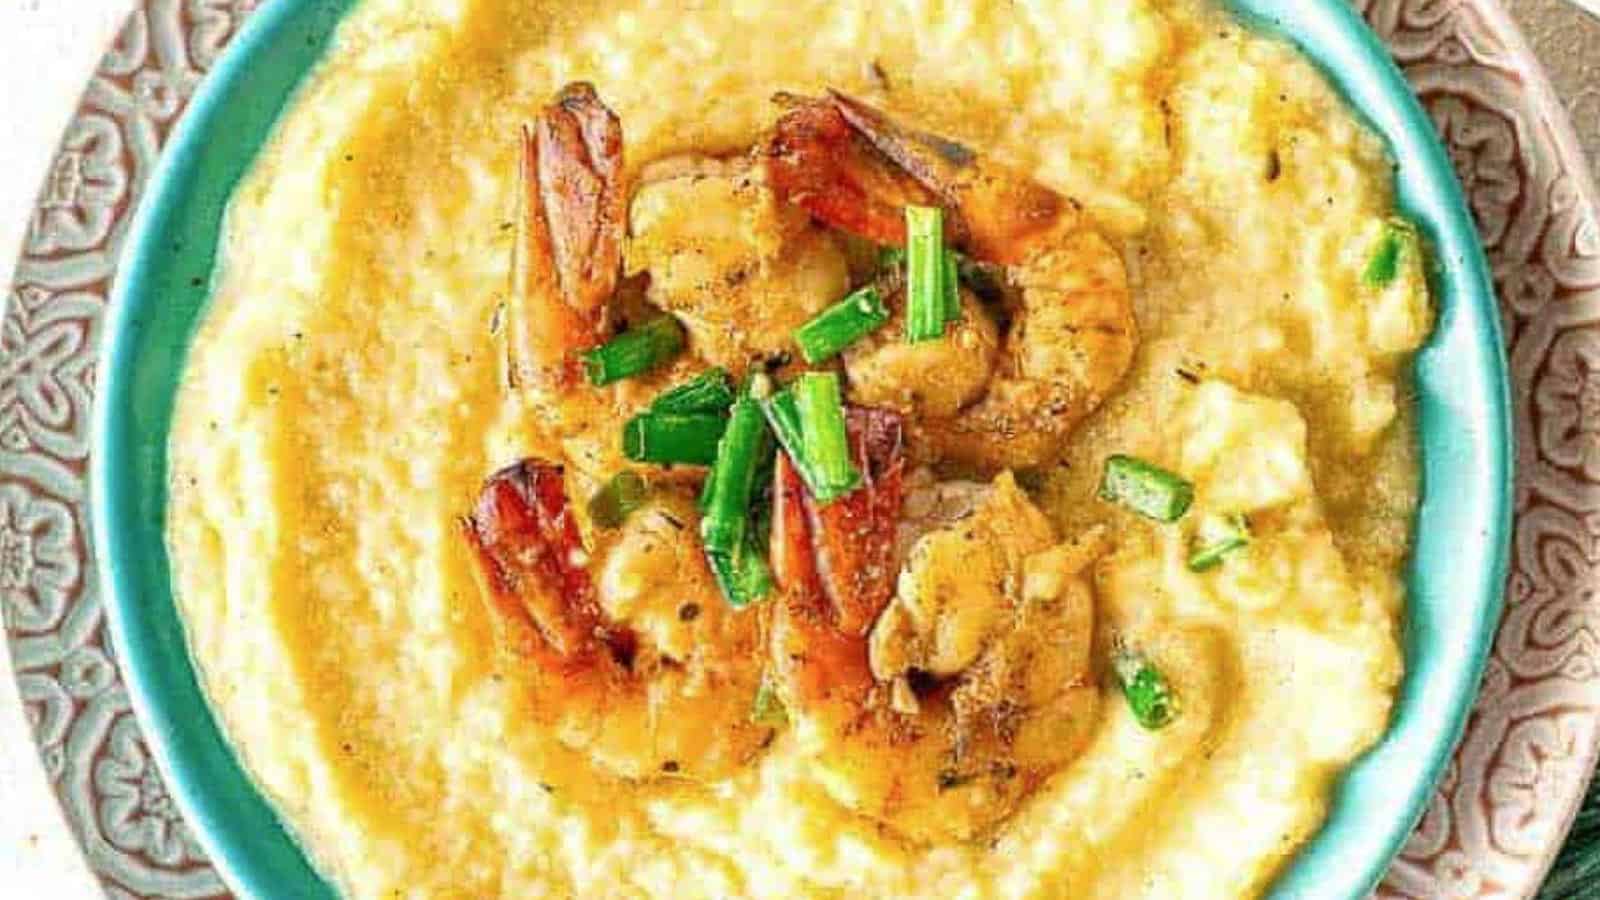 A bowl of grits topped with cajun shrimp.